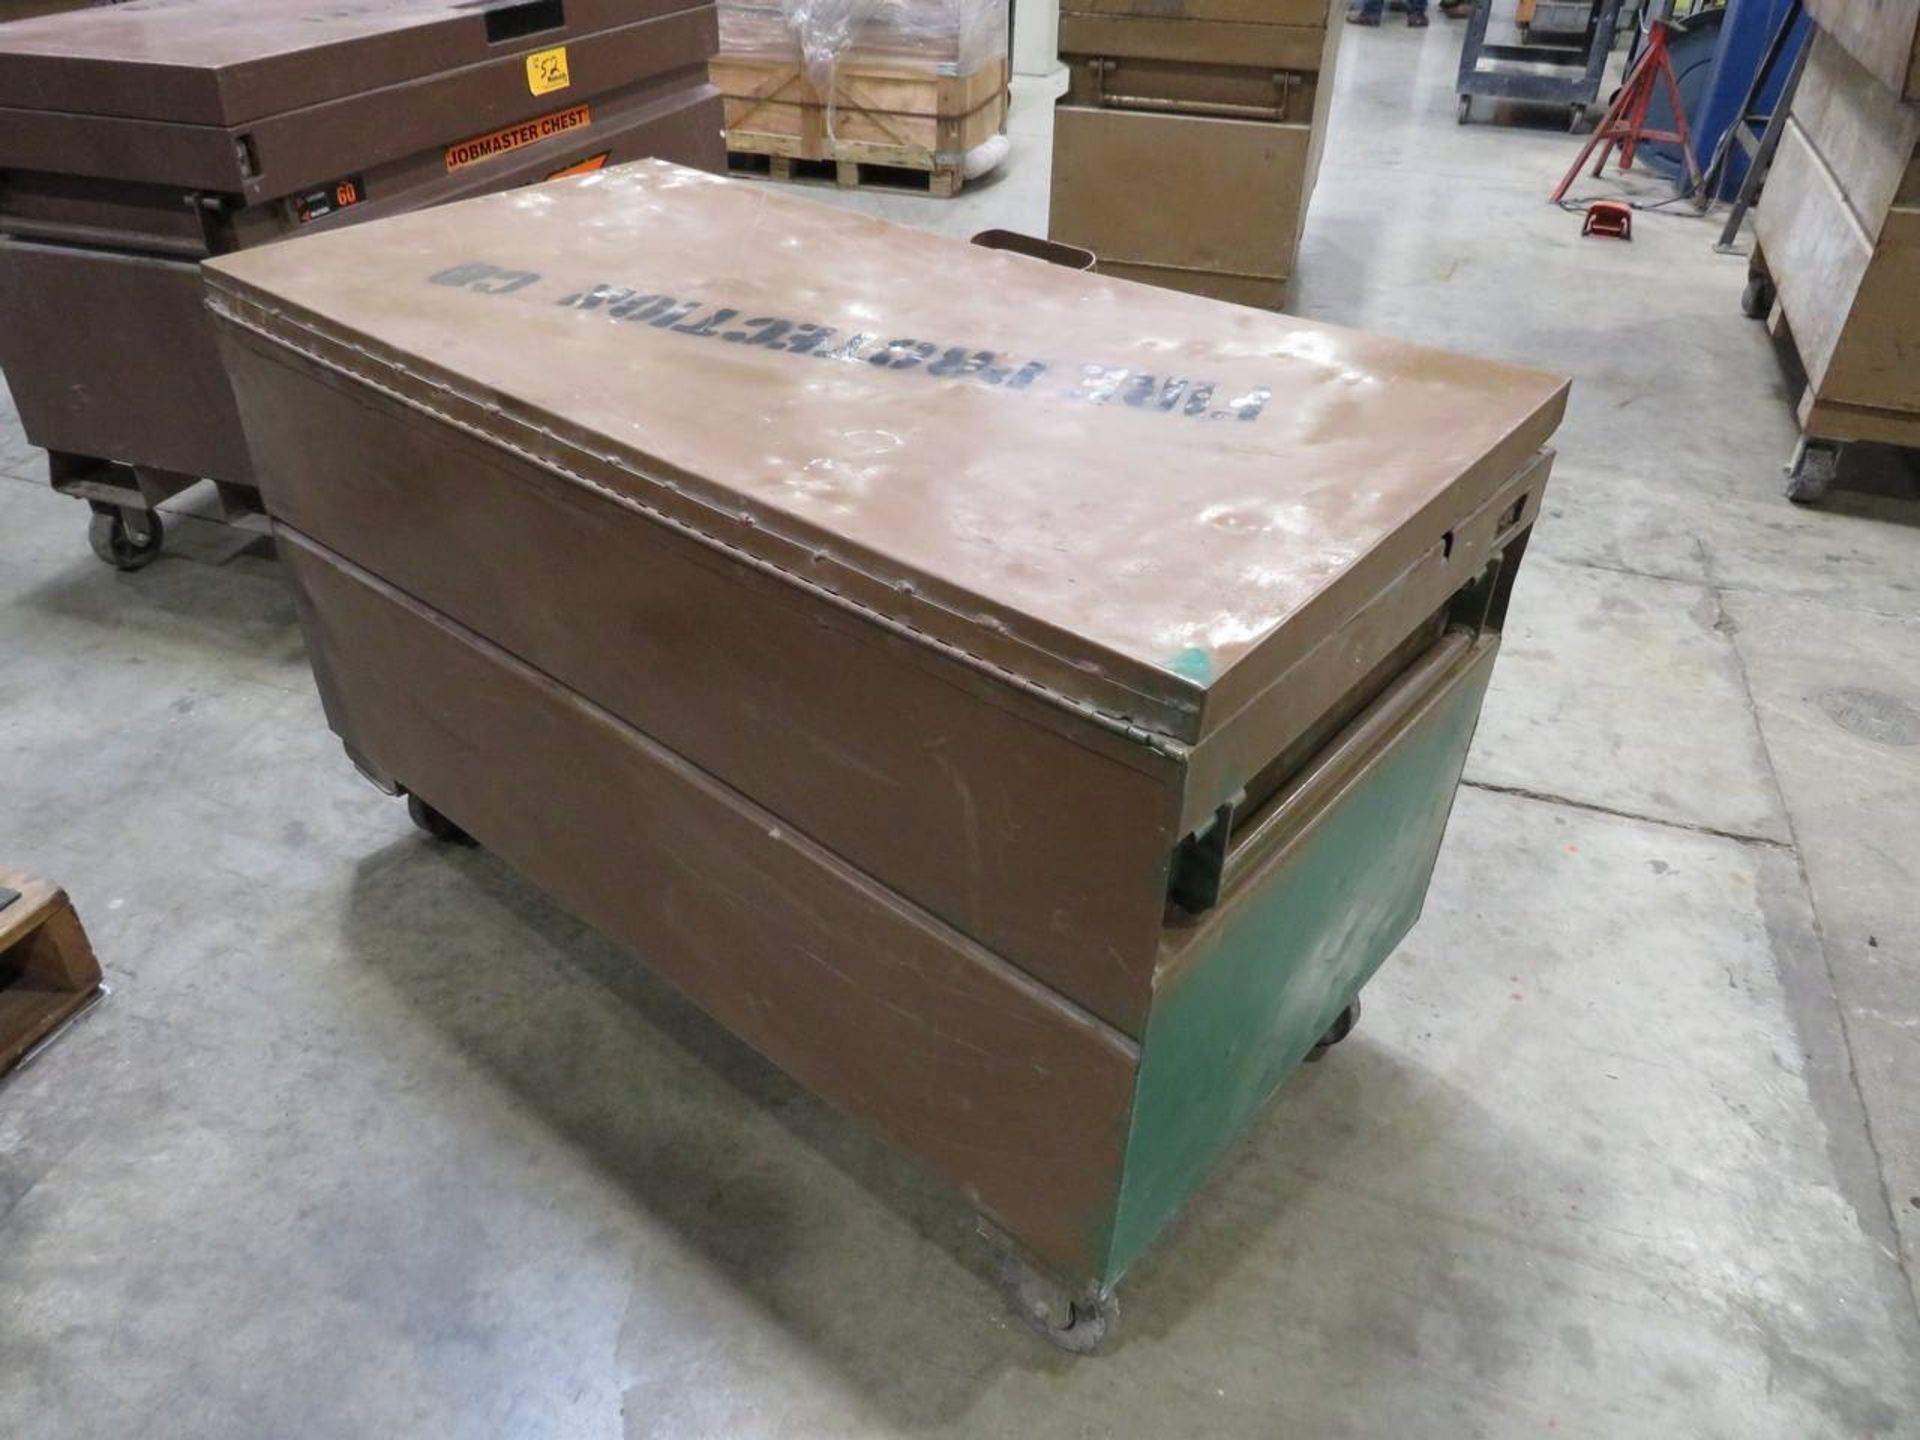 Knaack Approx. 48" W x 24" D x 31-1/2" H Storage Chest - Image 6 of 7